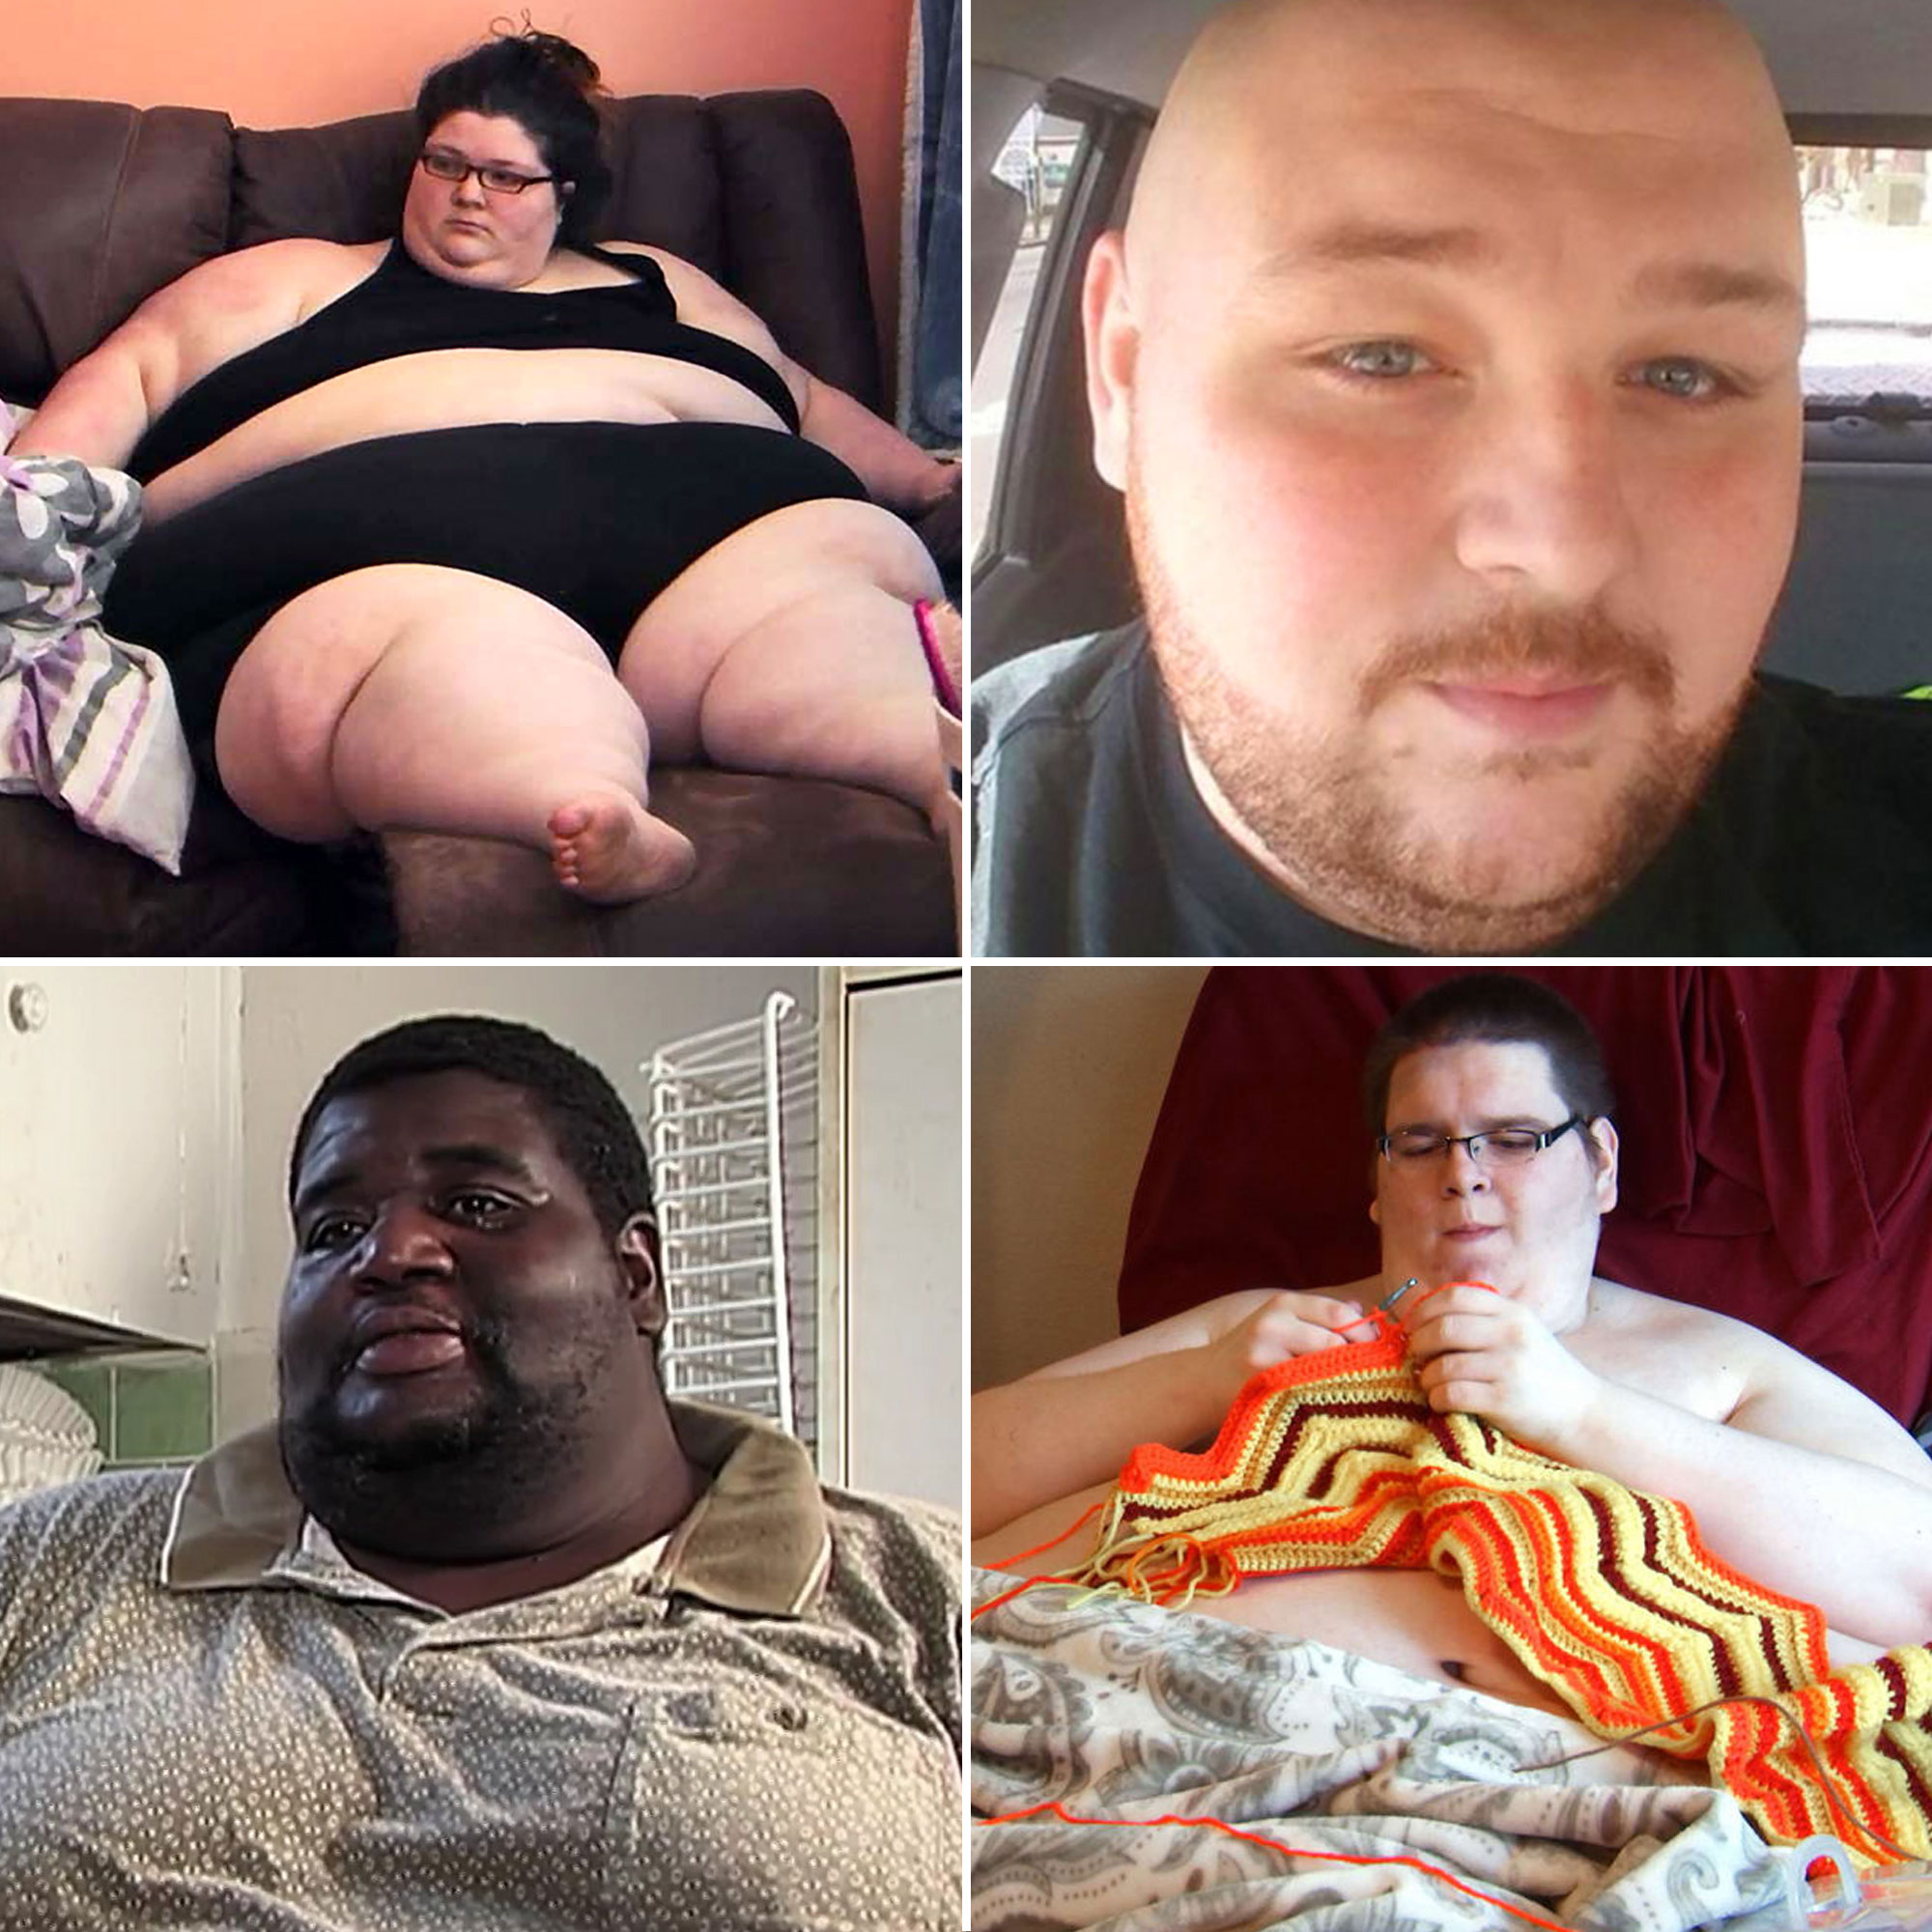 Joyce 600 lb Life Death My 600-Lb. Life' Stars Who Died: Deaths From TLC Franchise